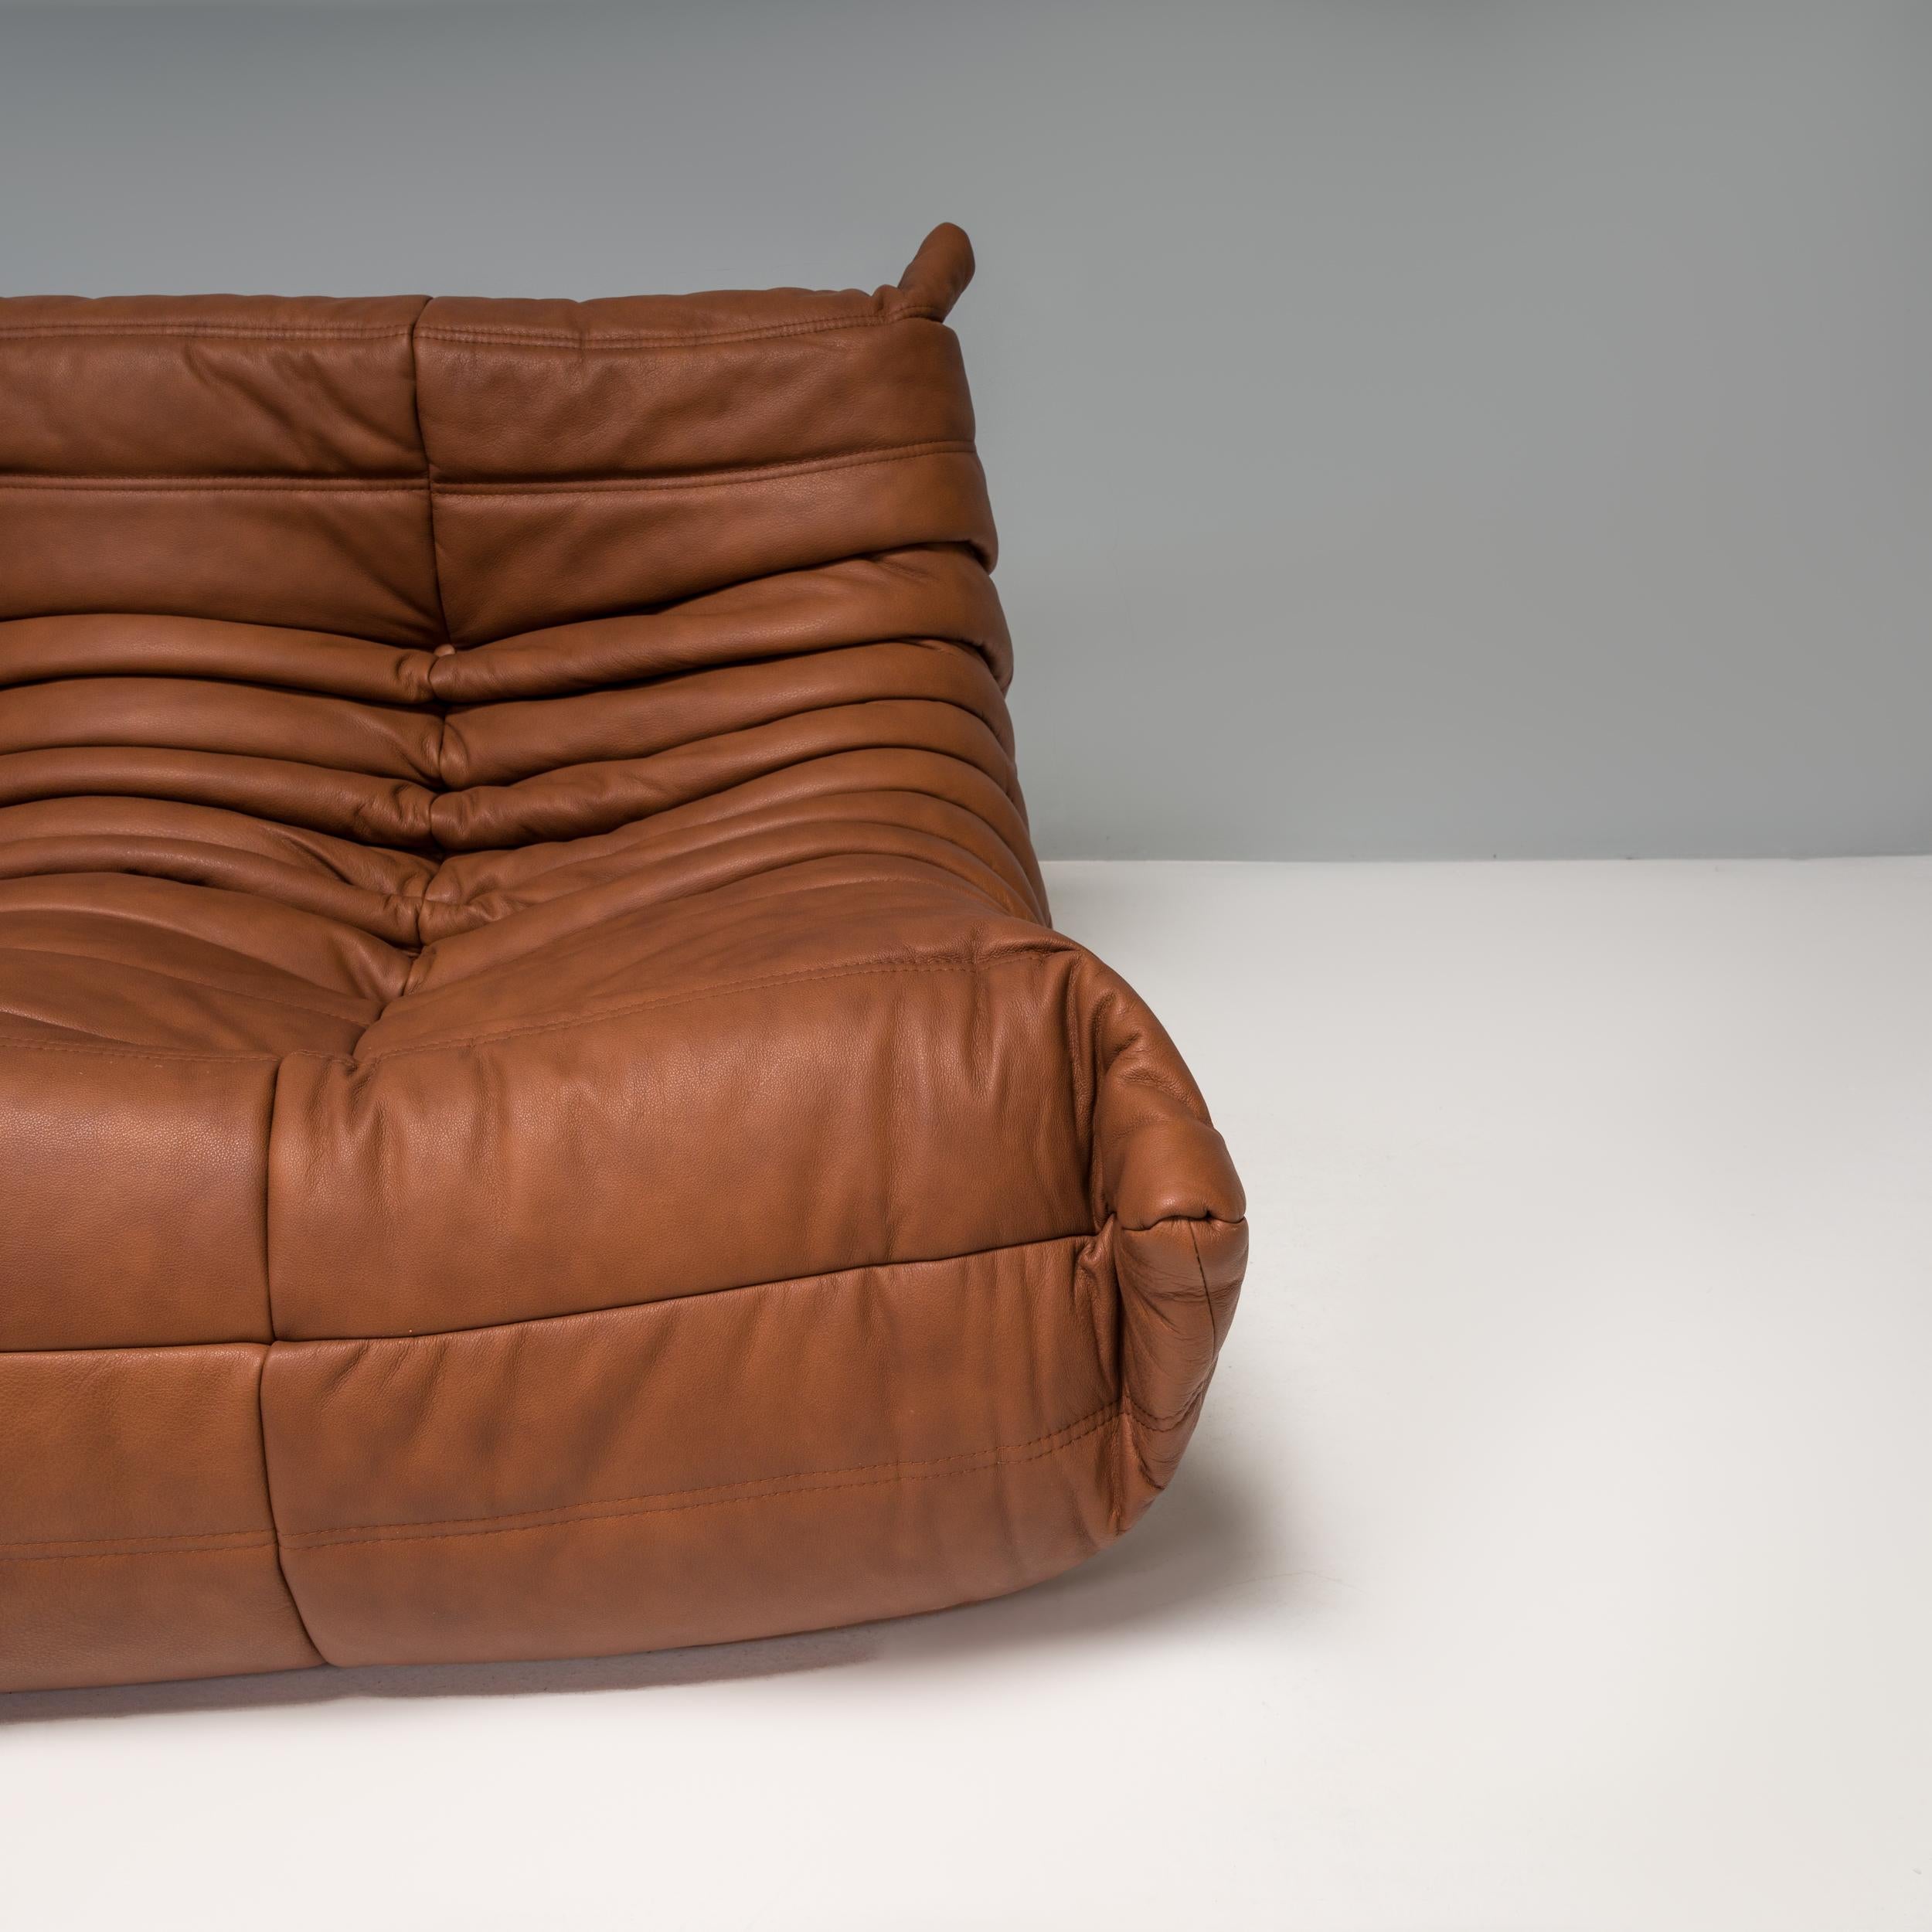 Late 20th Century Michel Ducaroy for Ligne Roset Togo Brown Leather Modular Sofa, Set of 5 For Sale